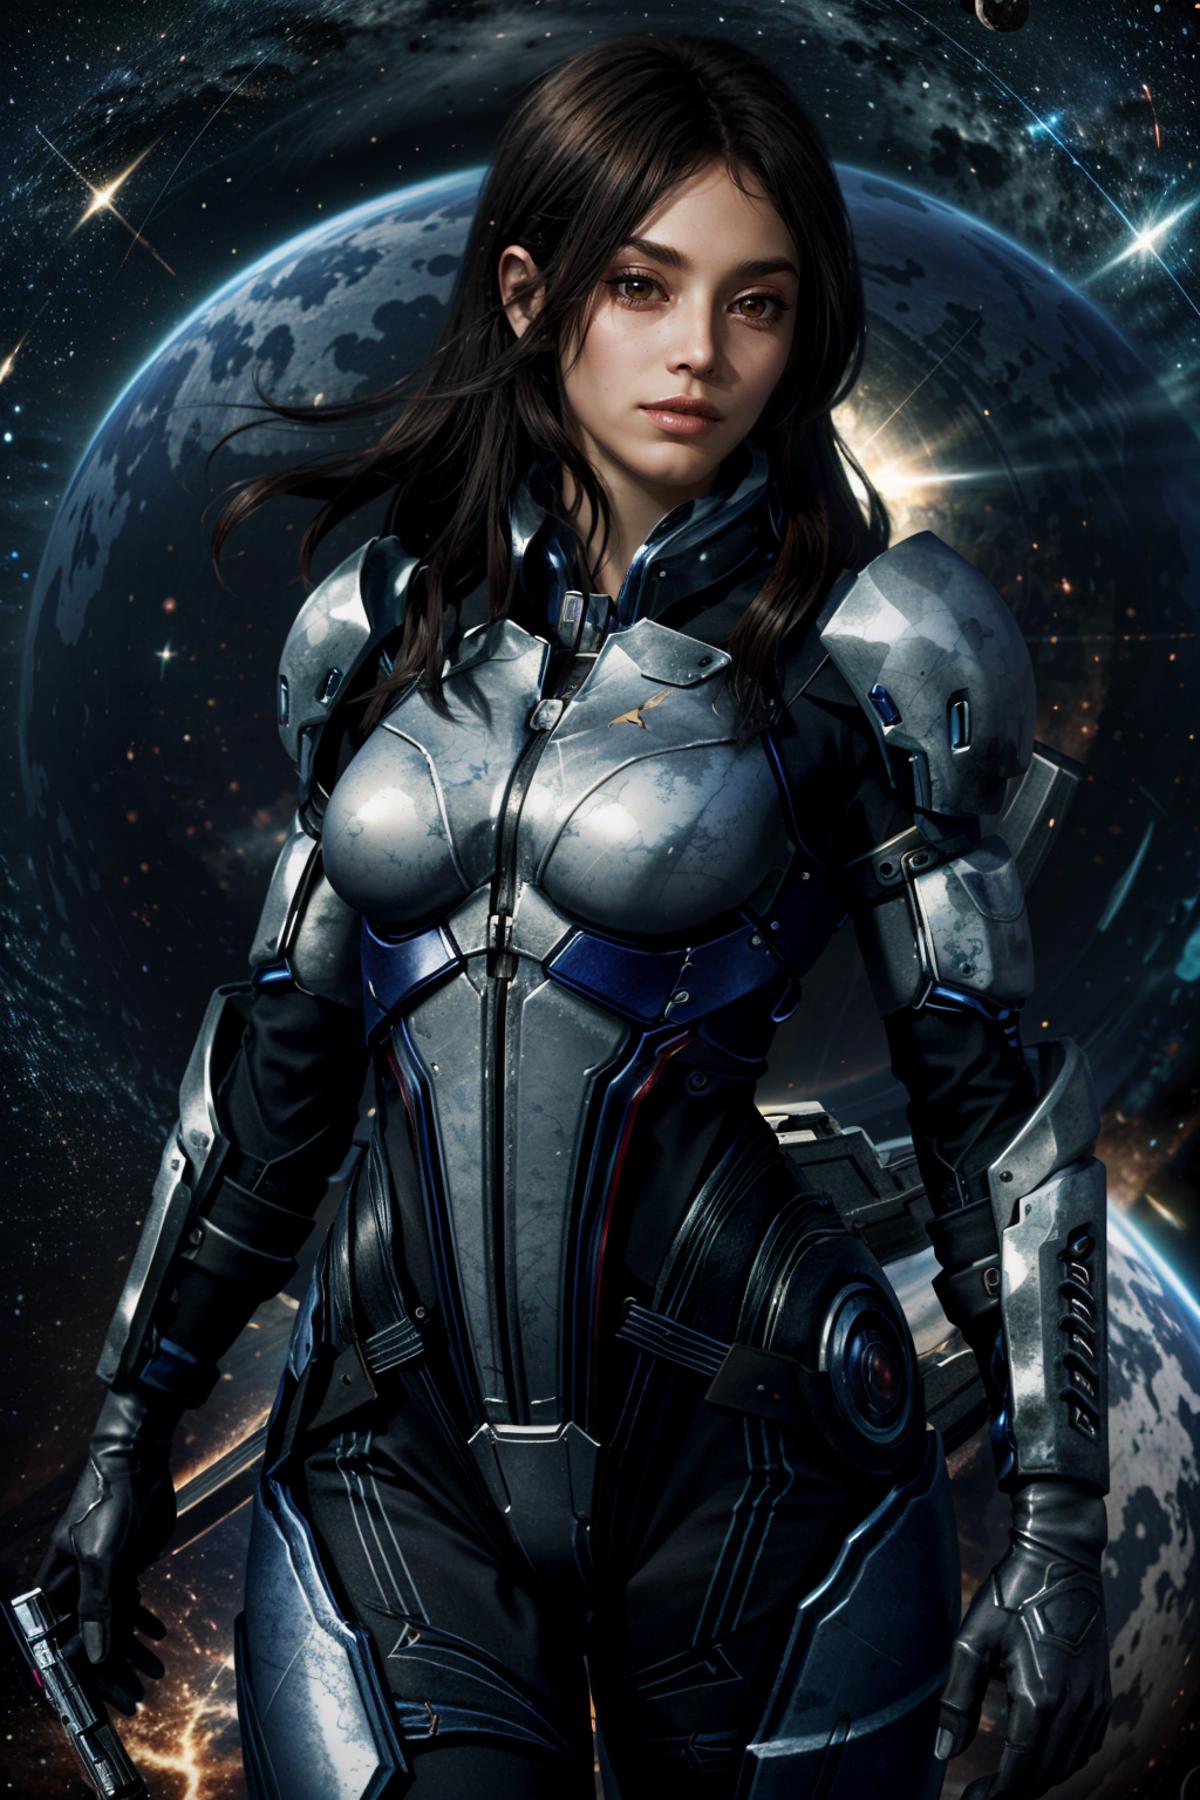 Ashley from Mass Effect image by BloodRedKittie